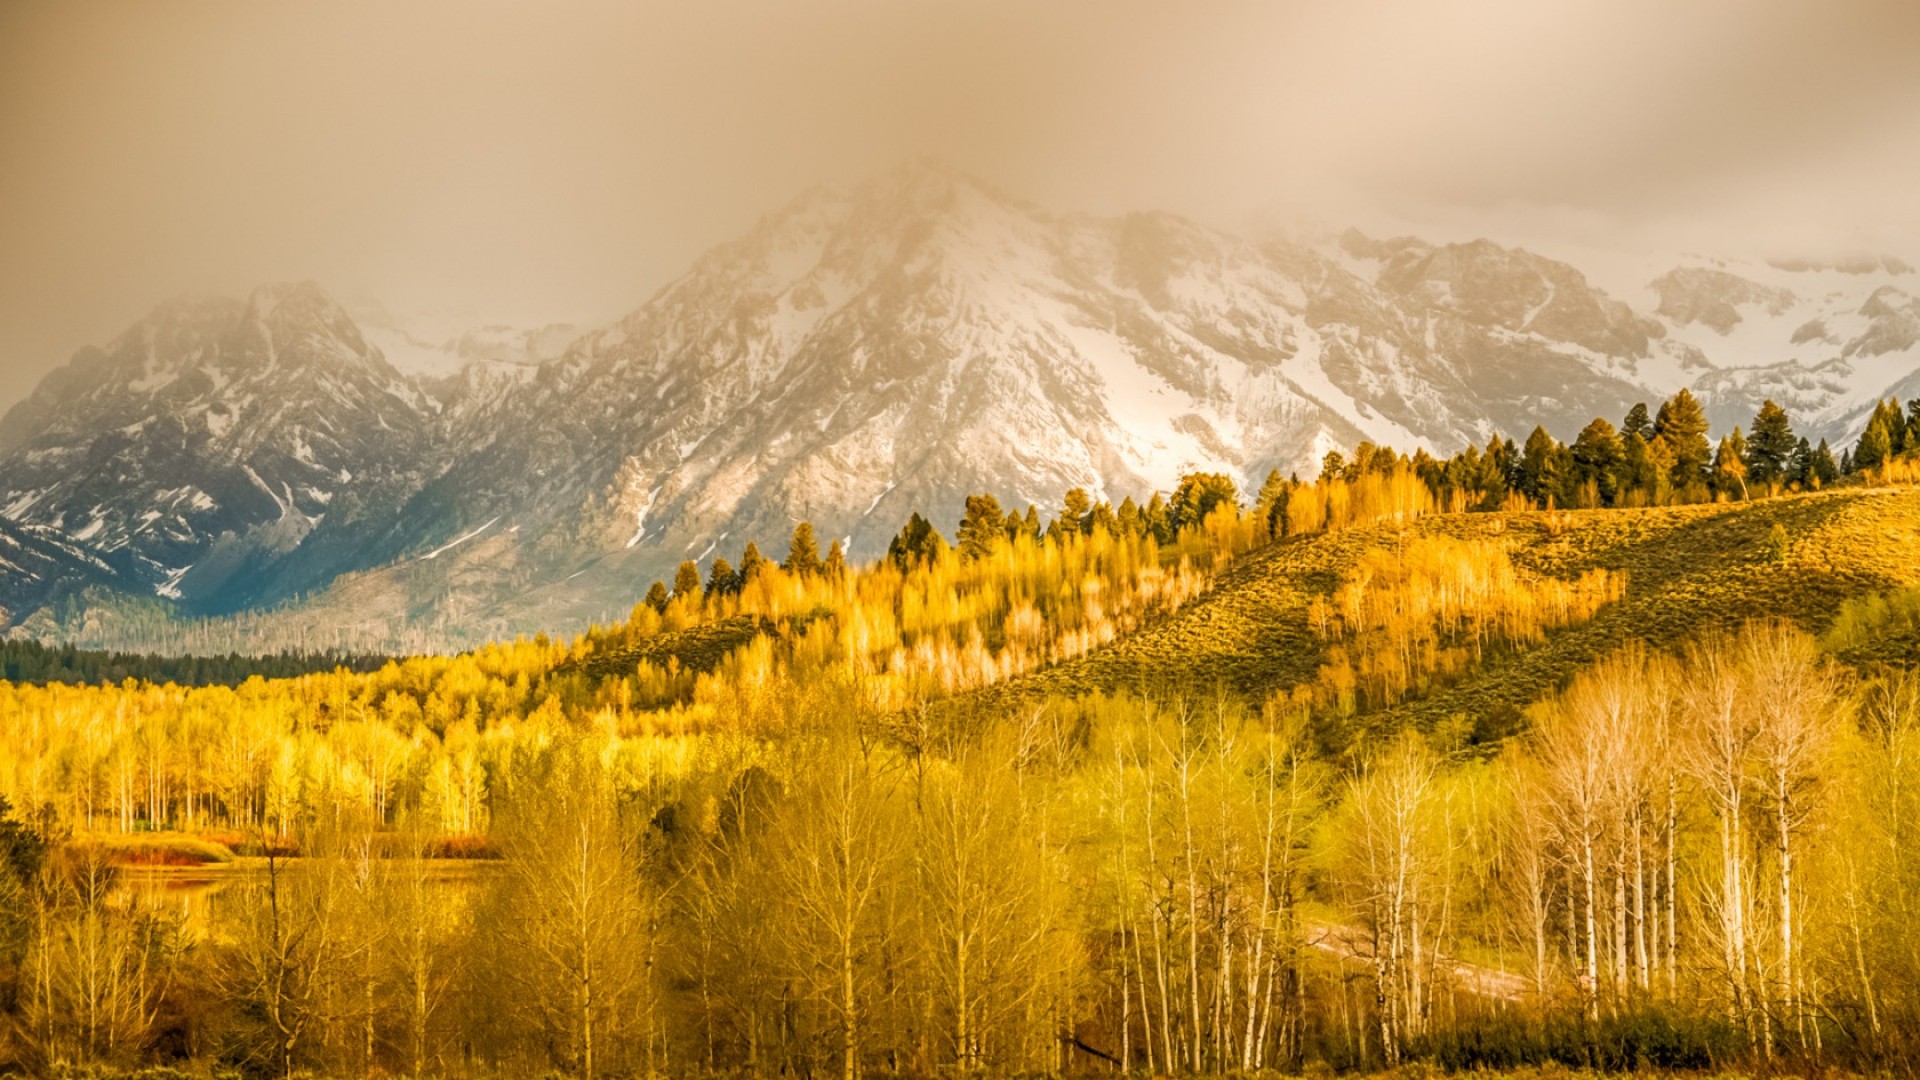 General 1920x1080 nature landscape mountains clouds trees forest hills grass Wyoming USA fall mist snowy peak birch